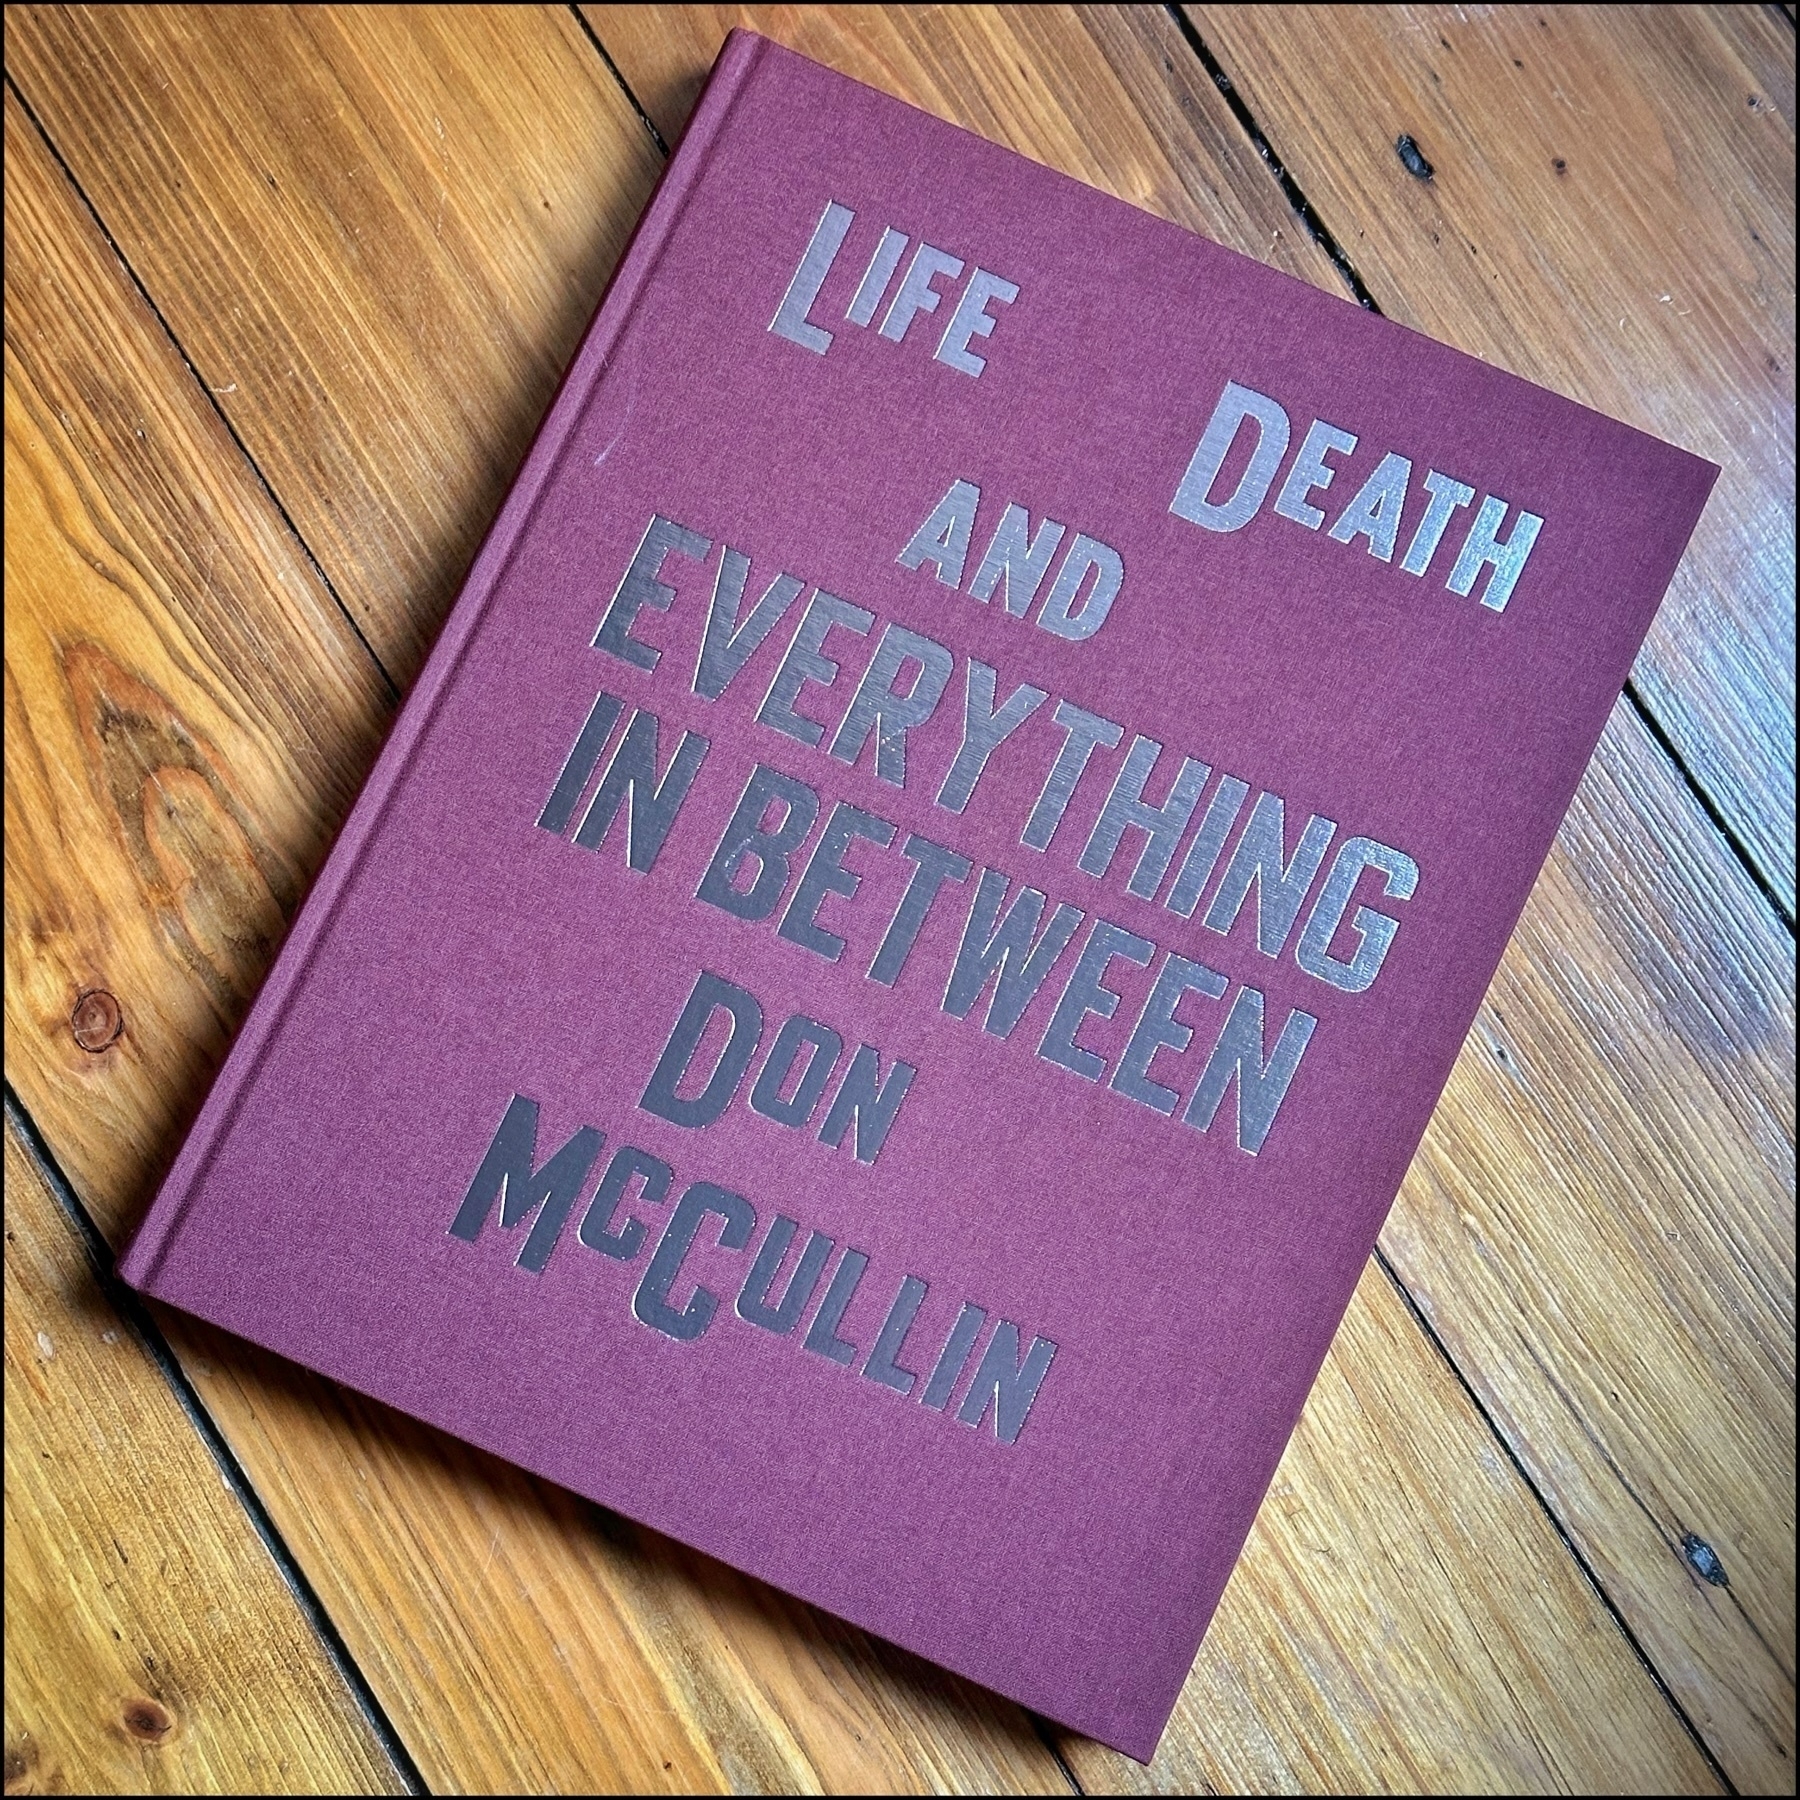 A book with the title "Life and Death and Everything In Between".